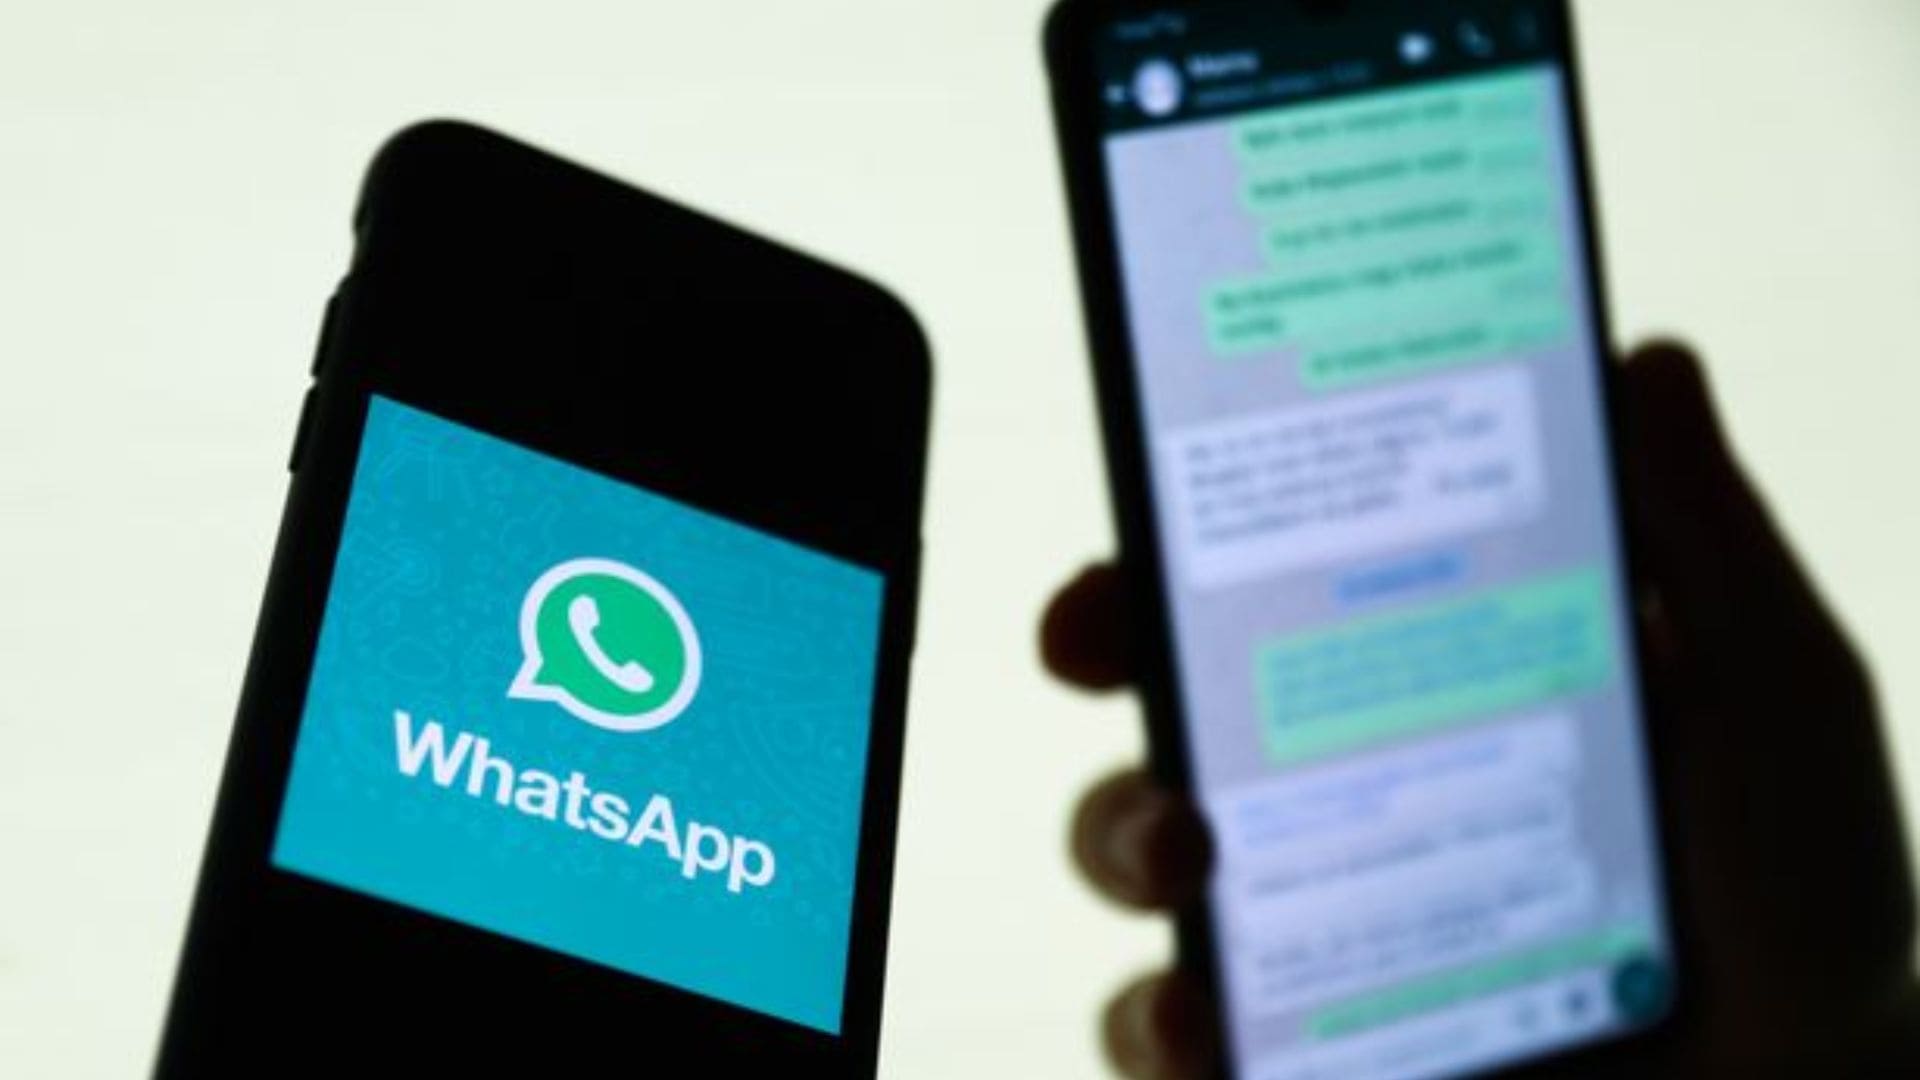 15 new durations for disappearing messages are coming as a new update in WhatsApp.